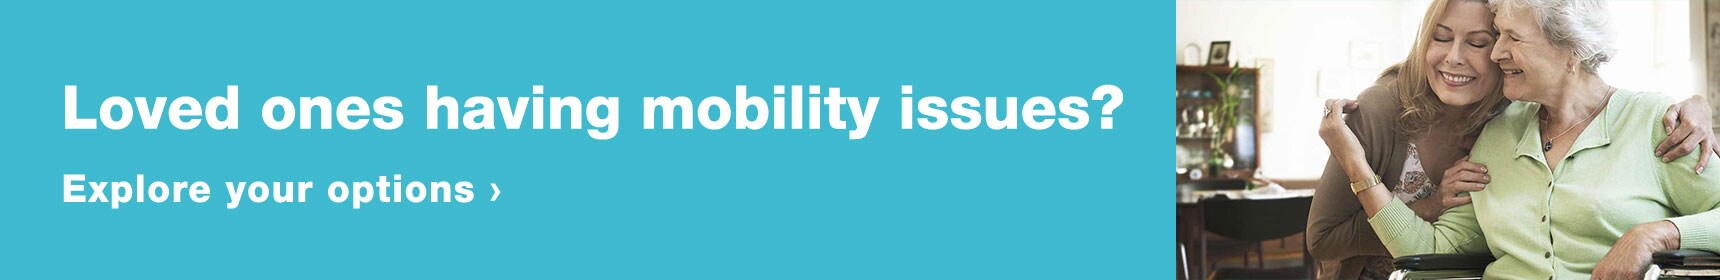 Loved ones having mobility issues? Explore your options.